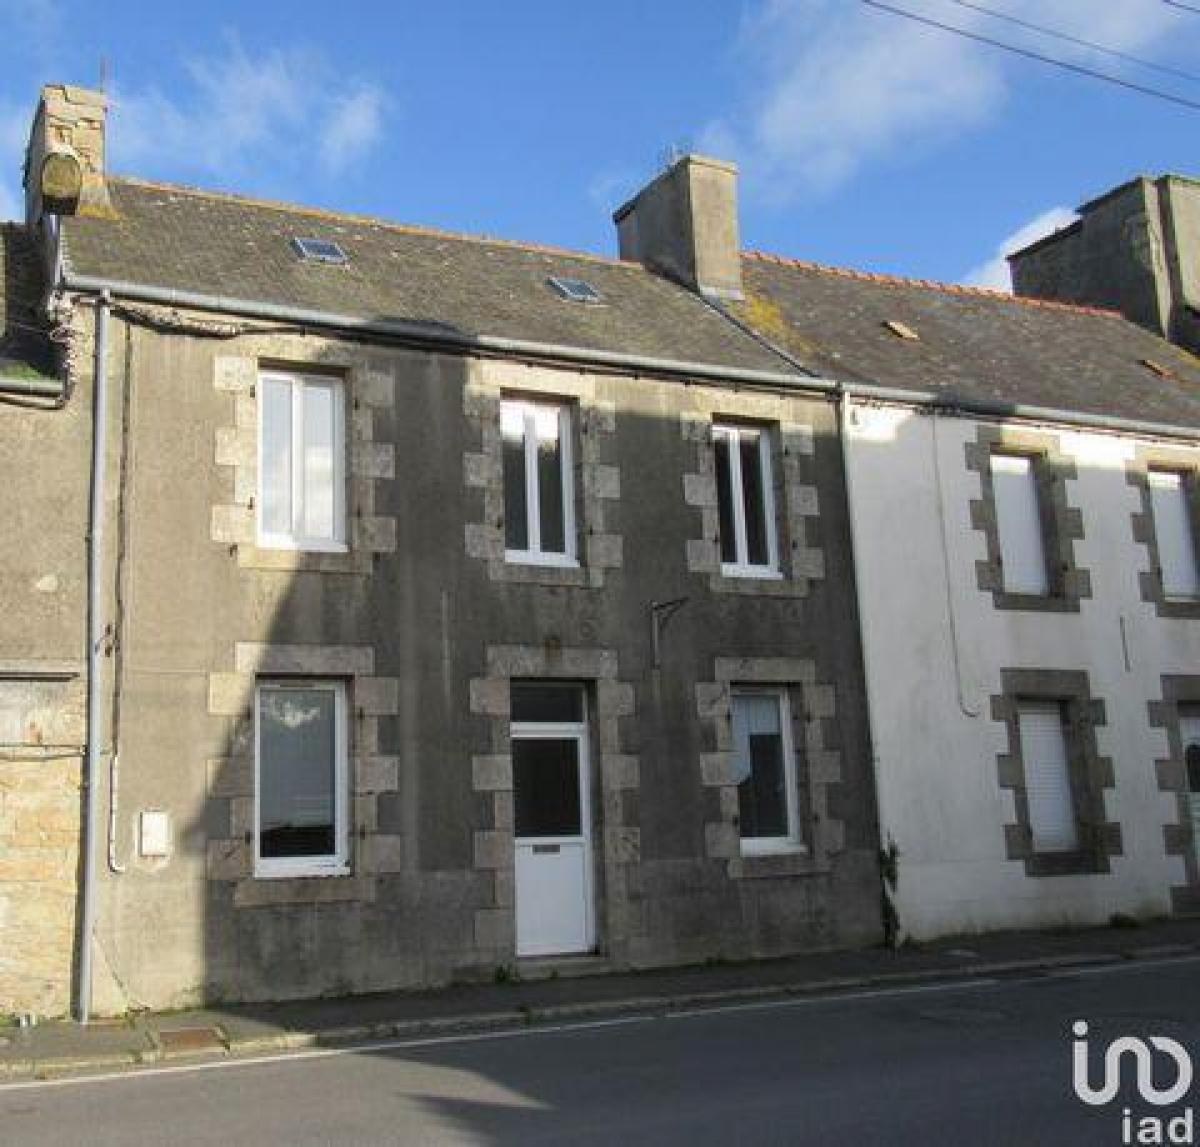 Picture of Home For Sale in Plouescat, Bretagne, France